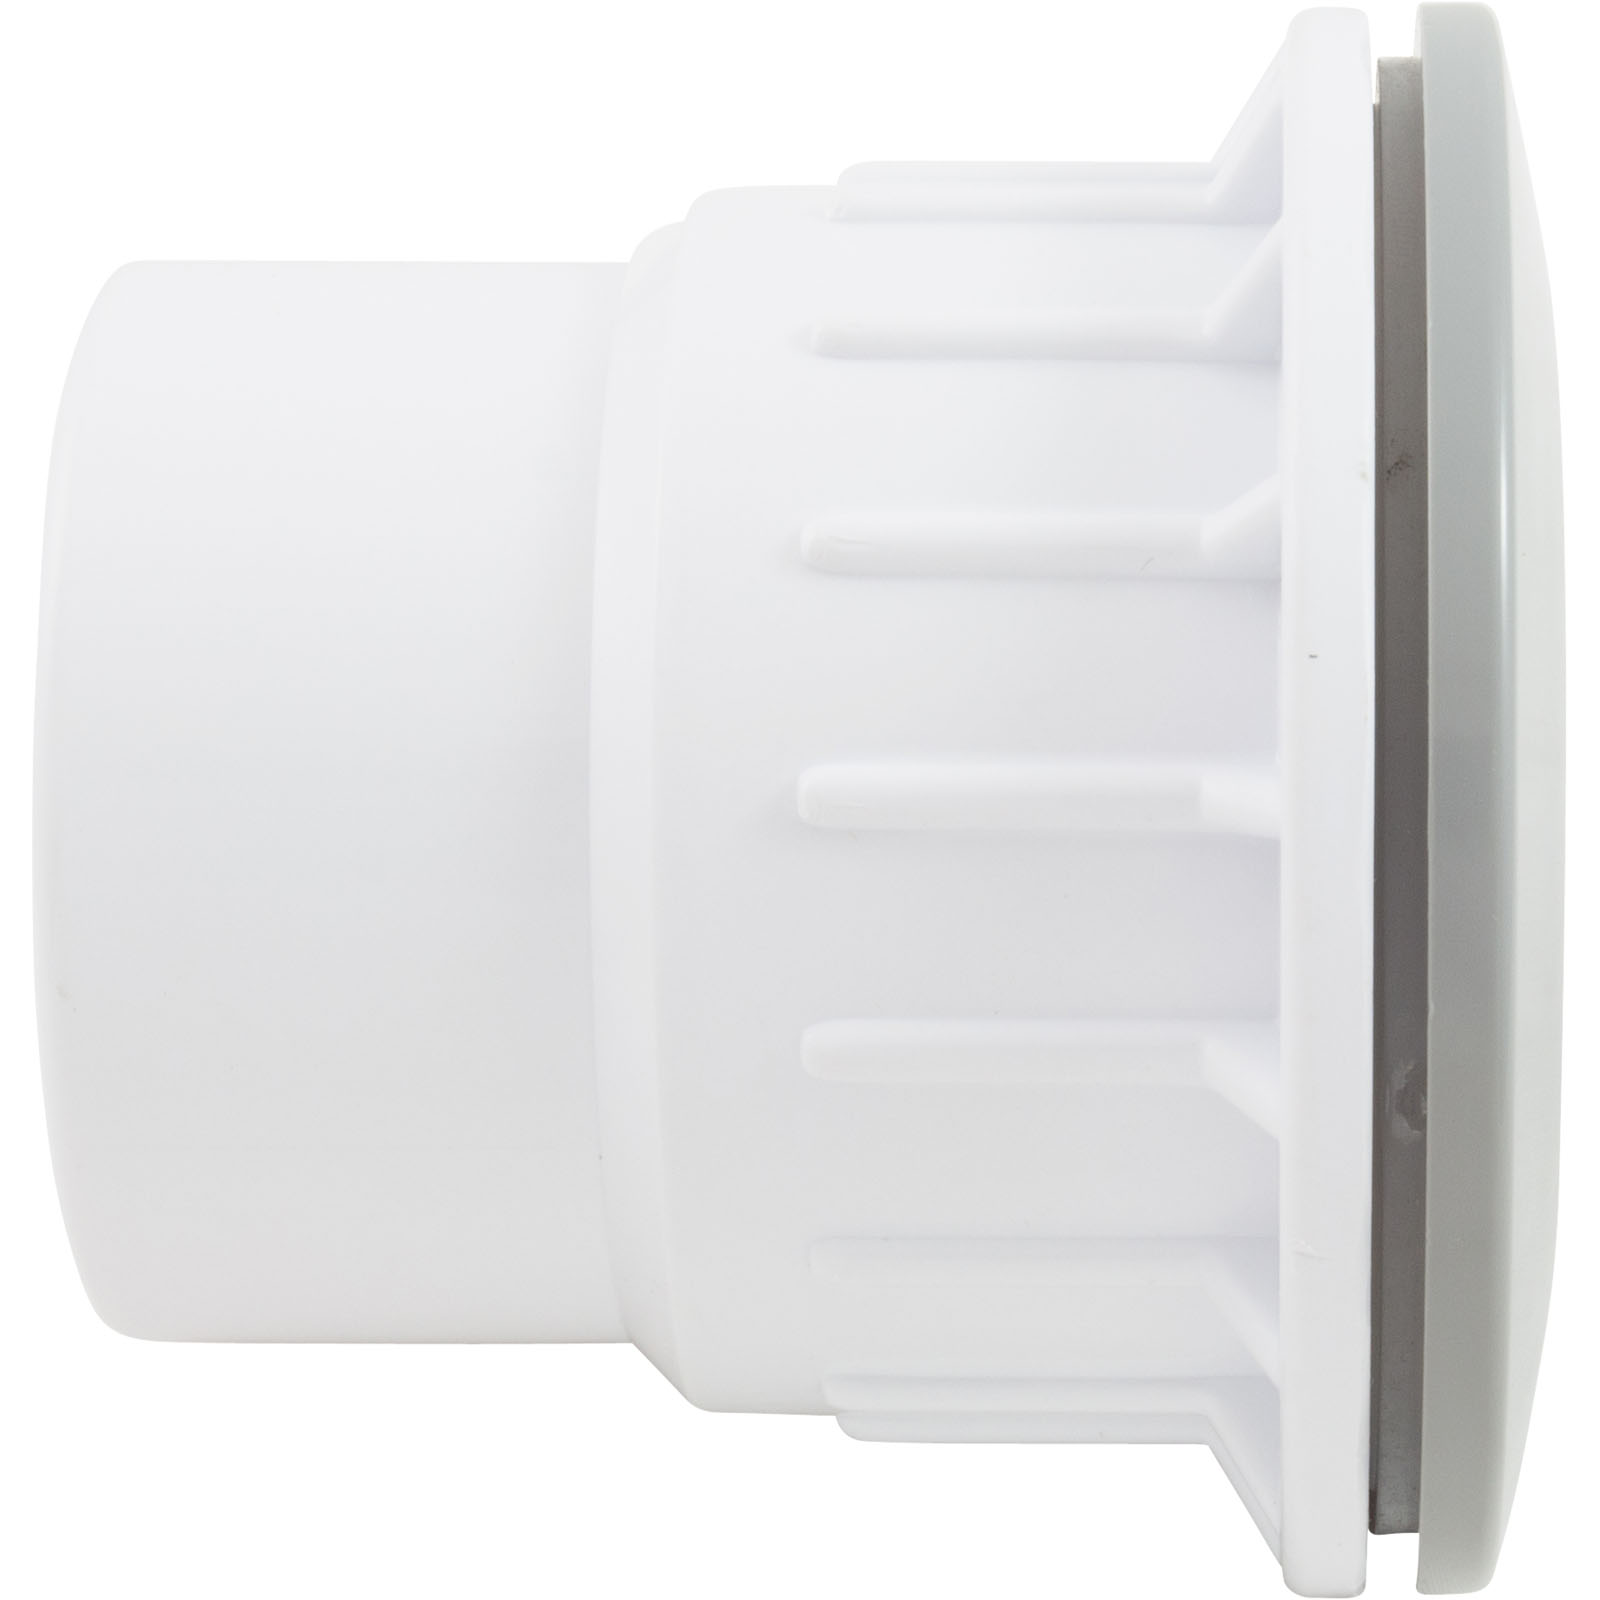 Picture of 25523-501-100 Wall Return Fitting CMP1-1/2